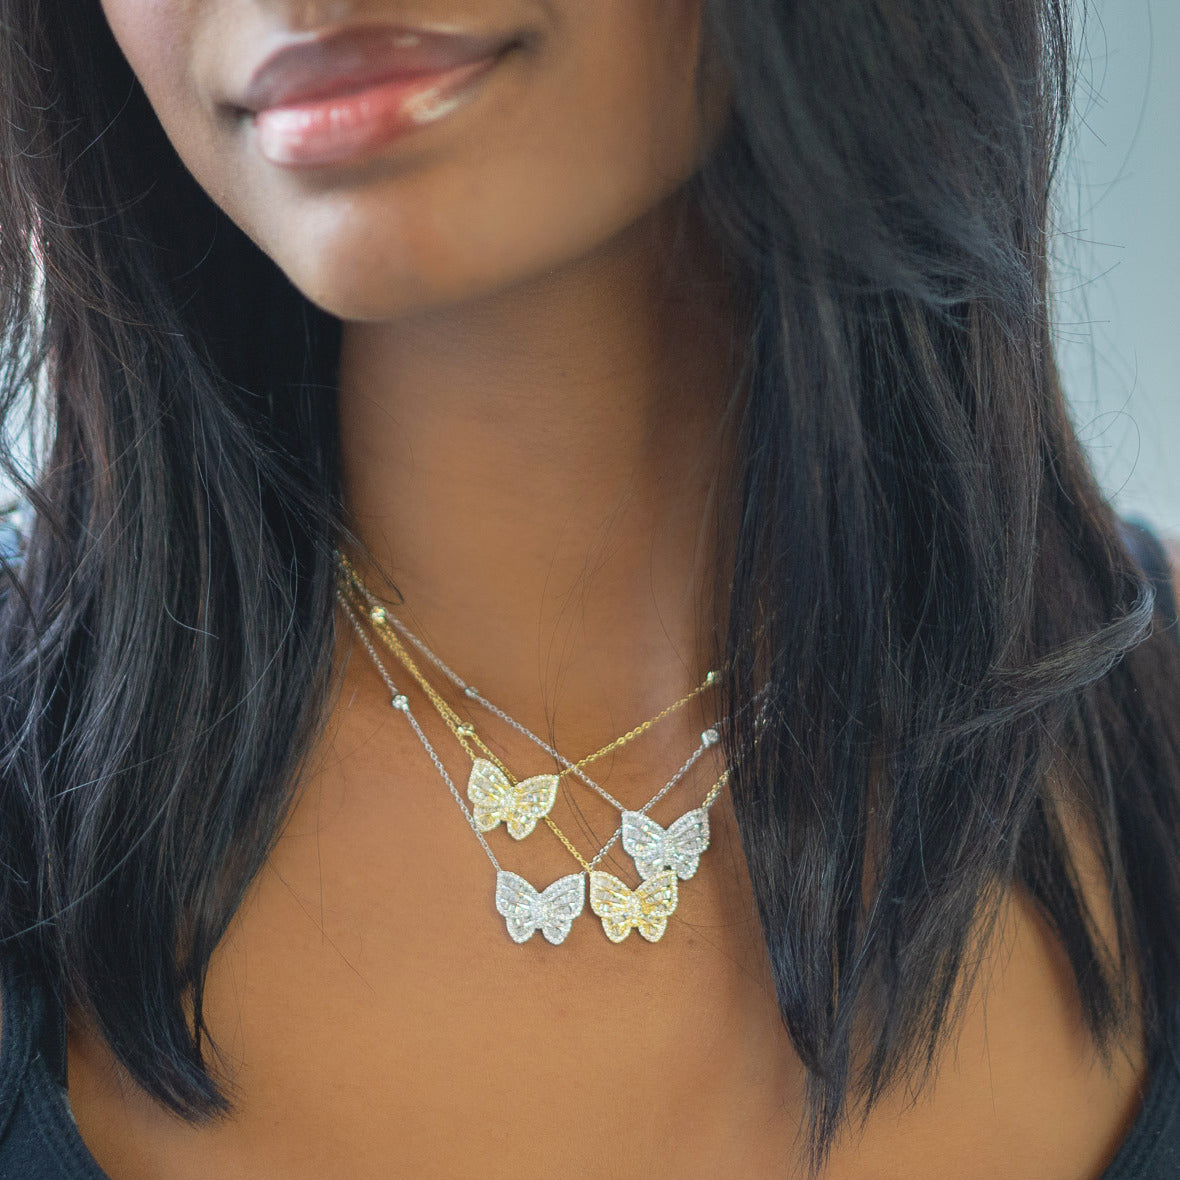 Silver and Gold Baguette CZ Butterfly Necklaces from Alexandra Marks Jewelry